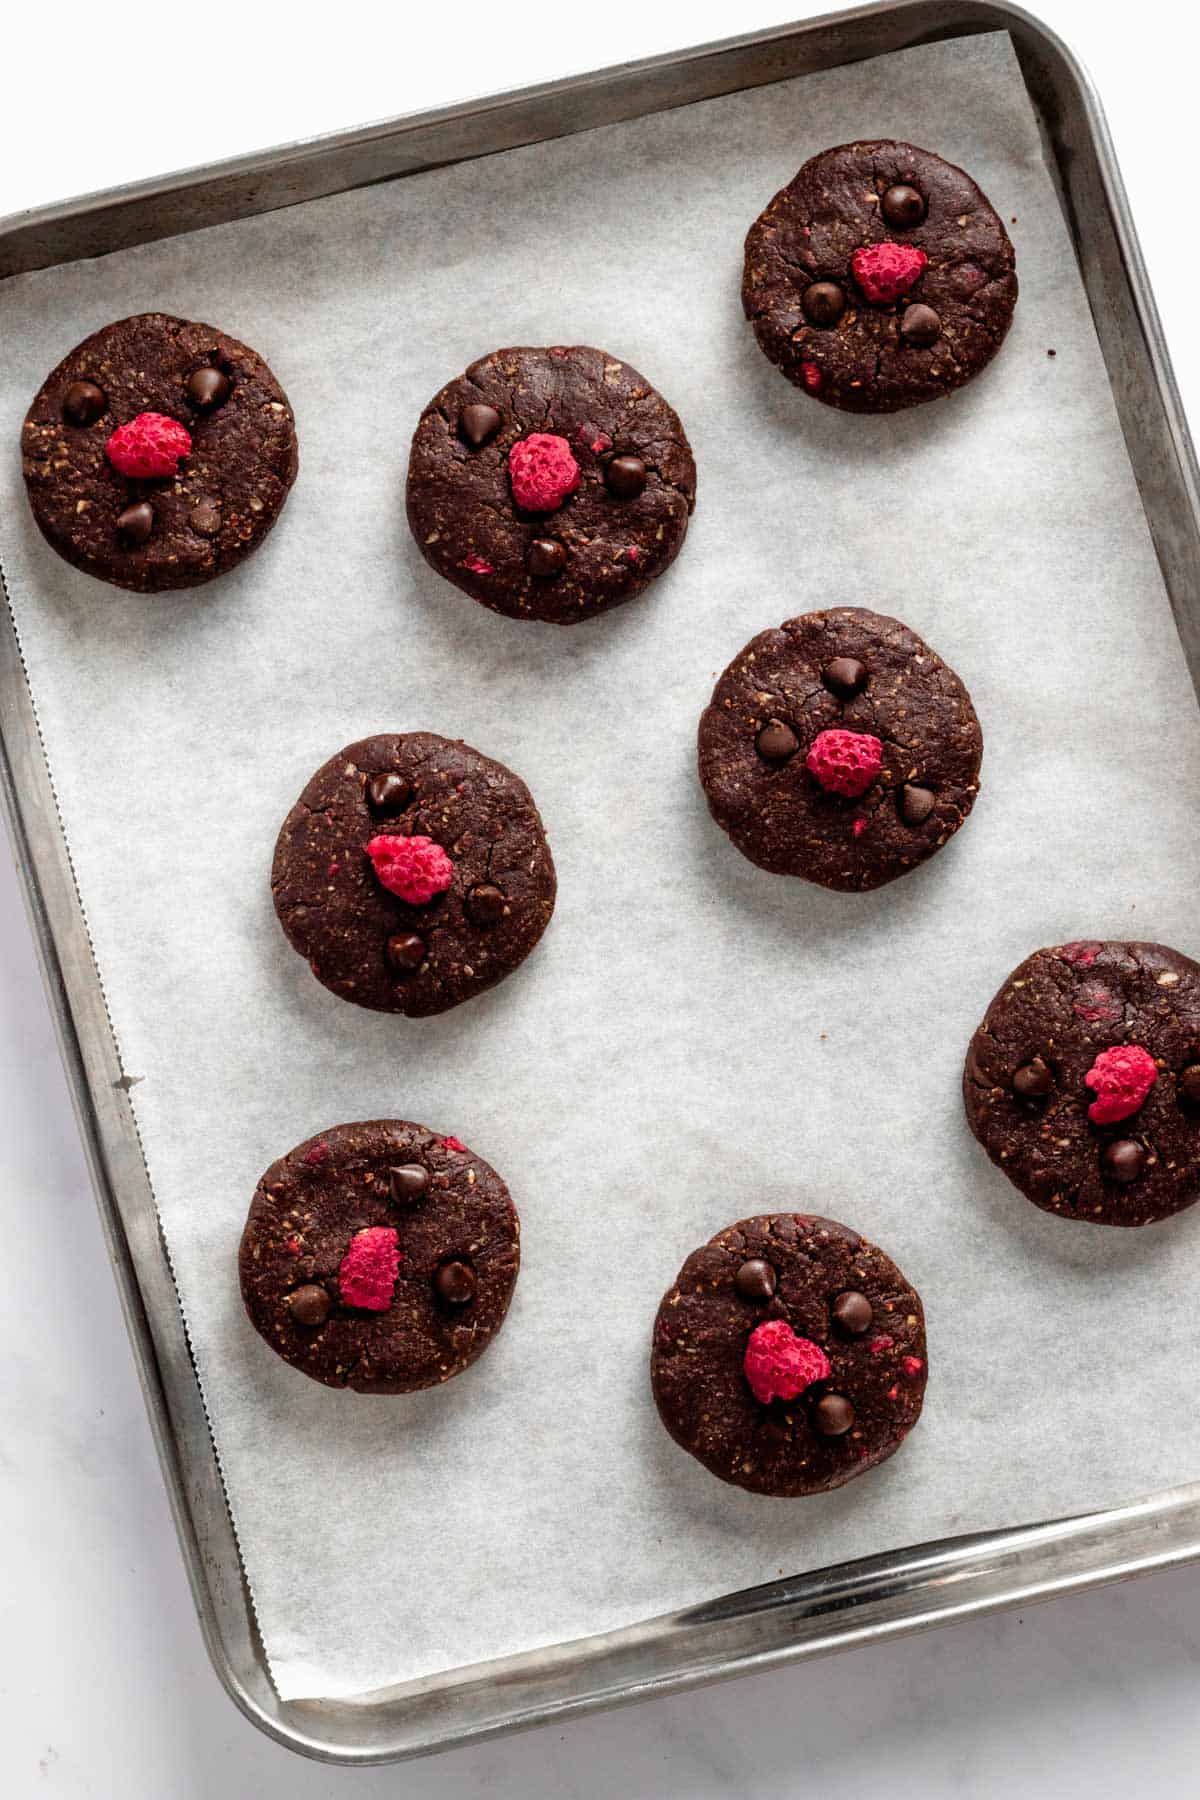 chocolate oatmeal no bake cookies with dried raspberries on a baking sheet.